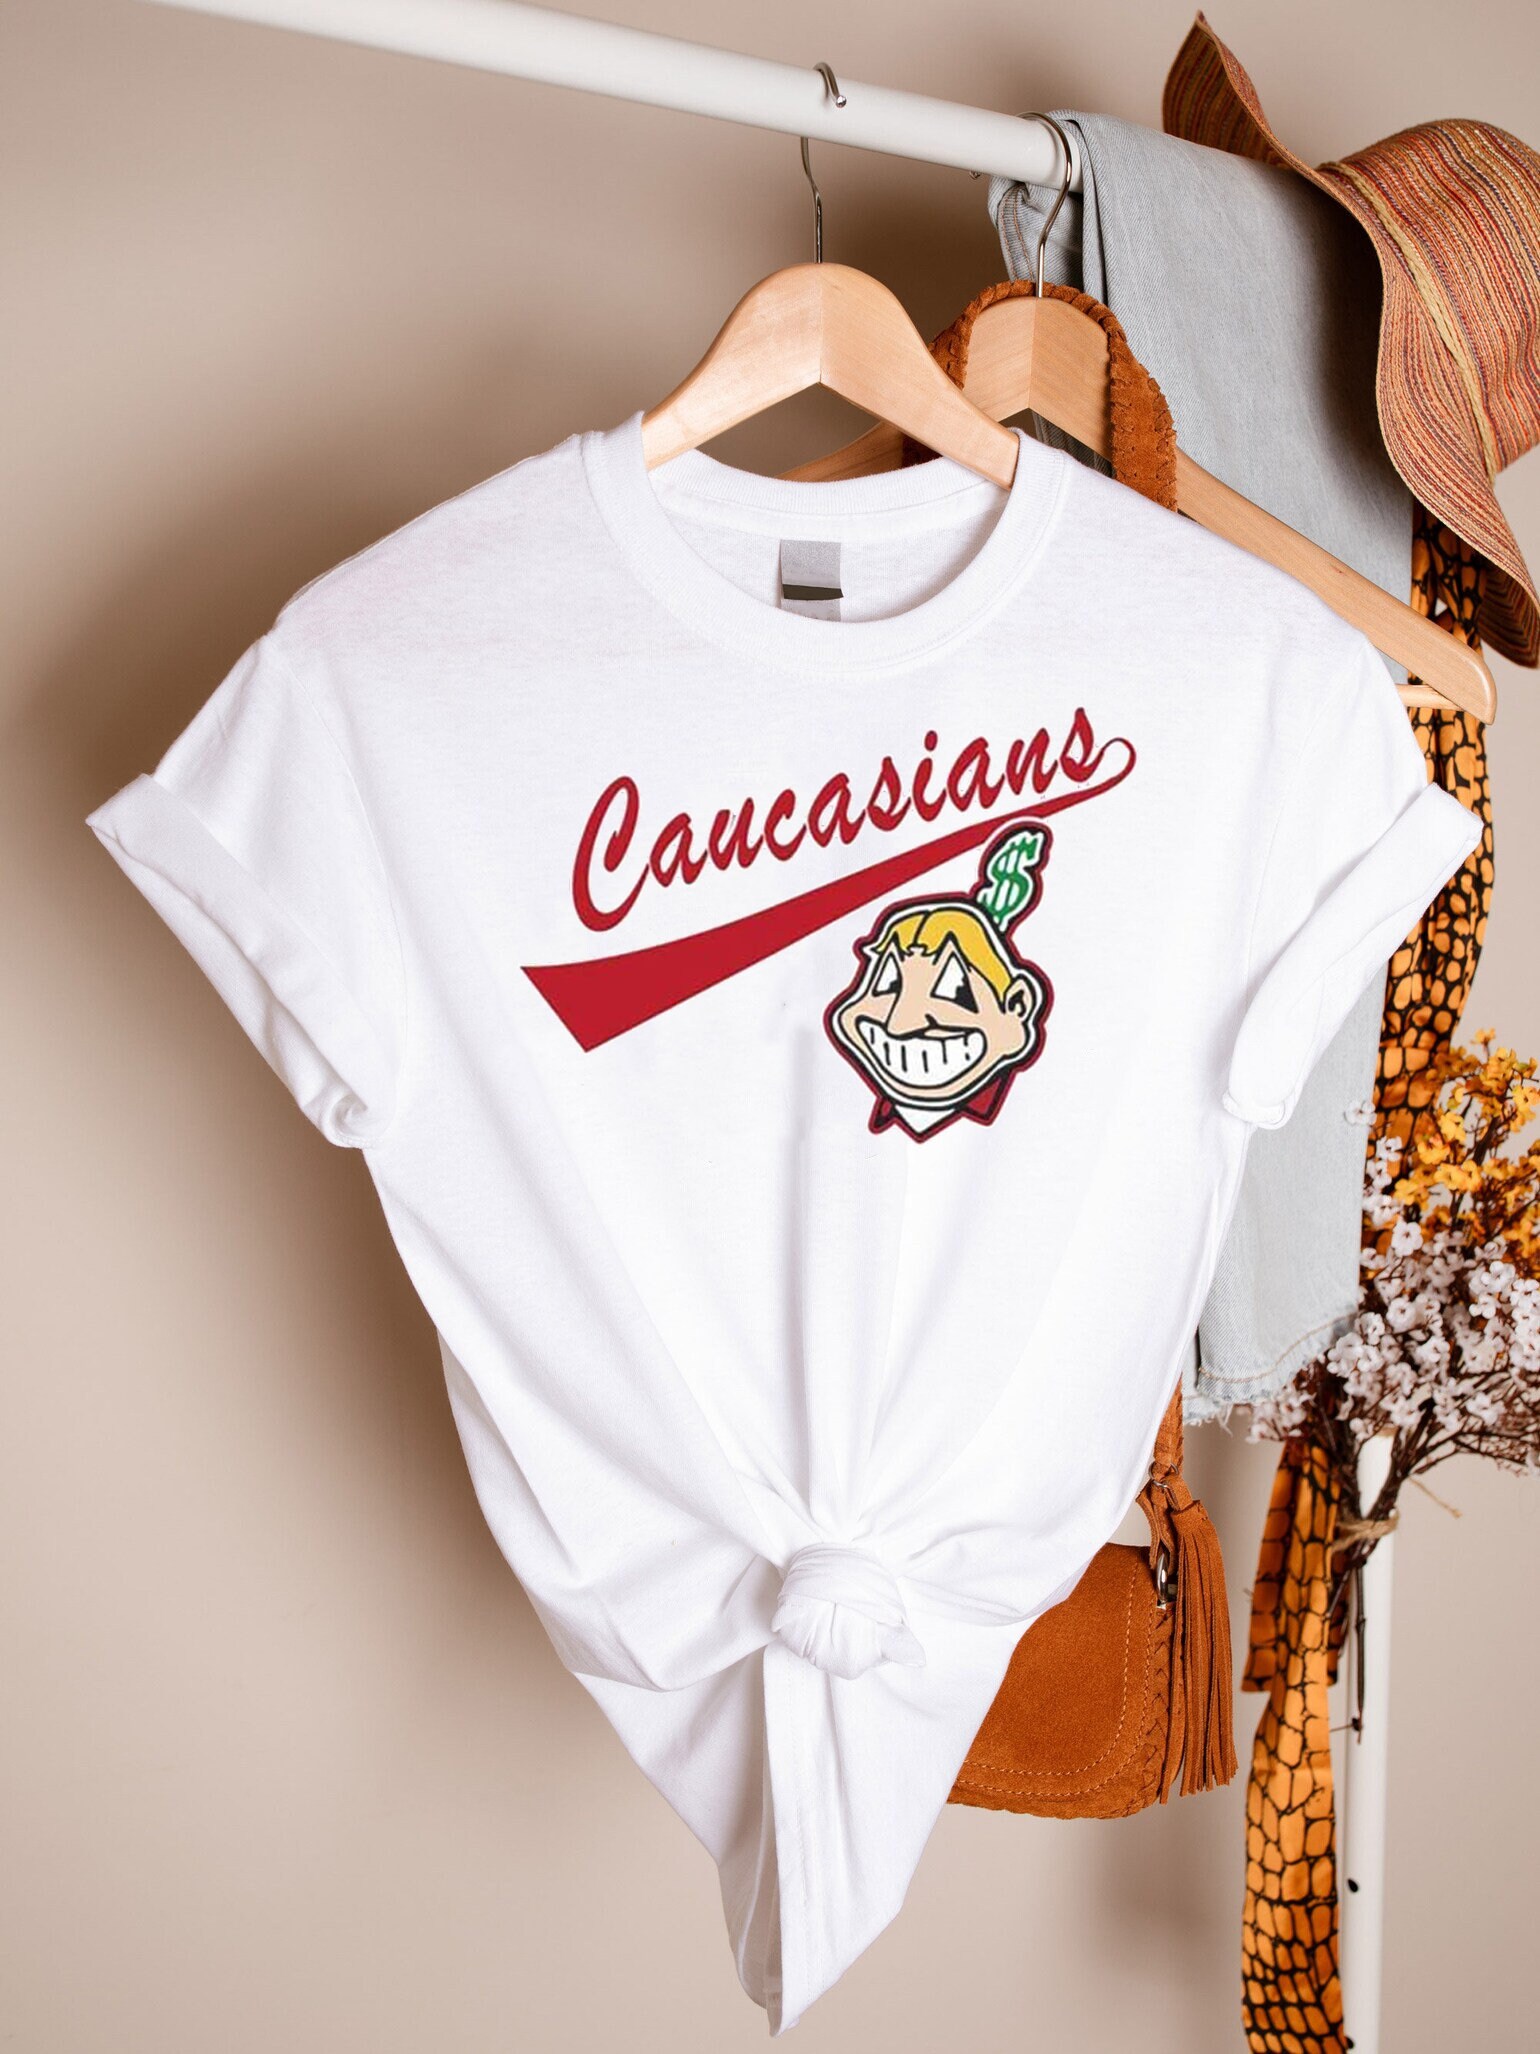 Cleveland Caucasians T-shirt Funny Parody Tee Vintage Funny 